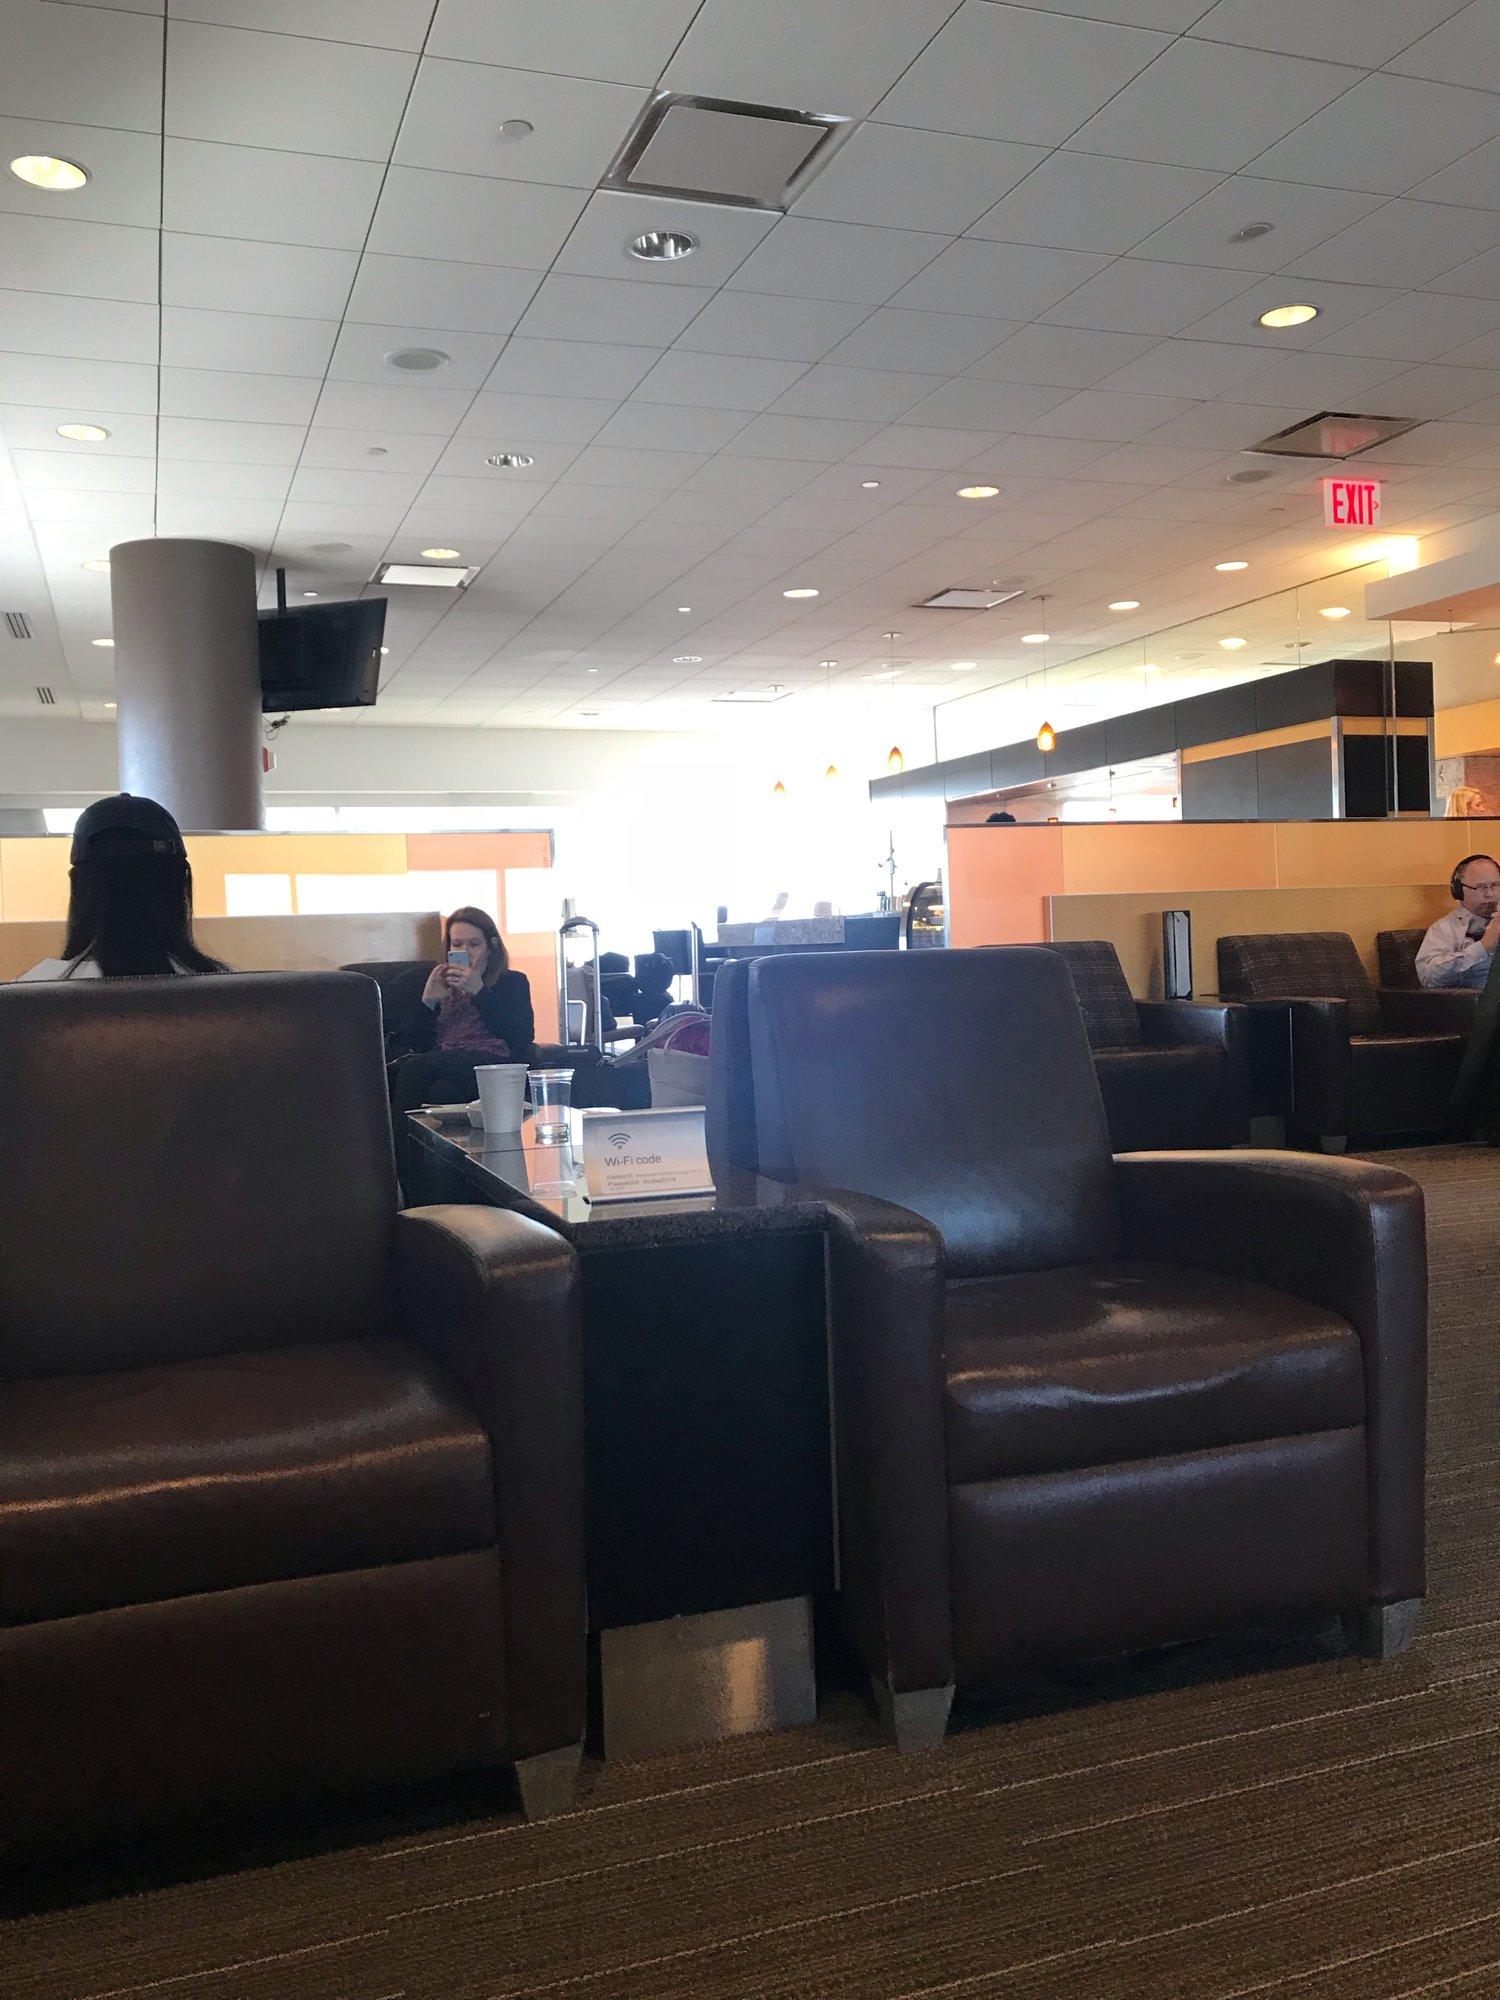 American Airlines Admirals Club image 17 of 25